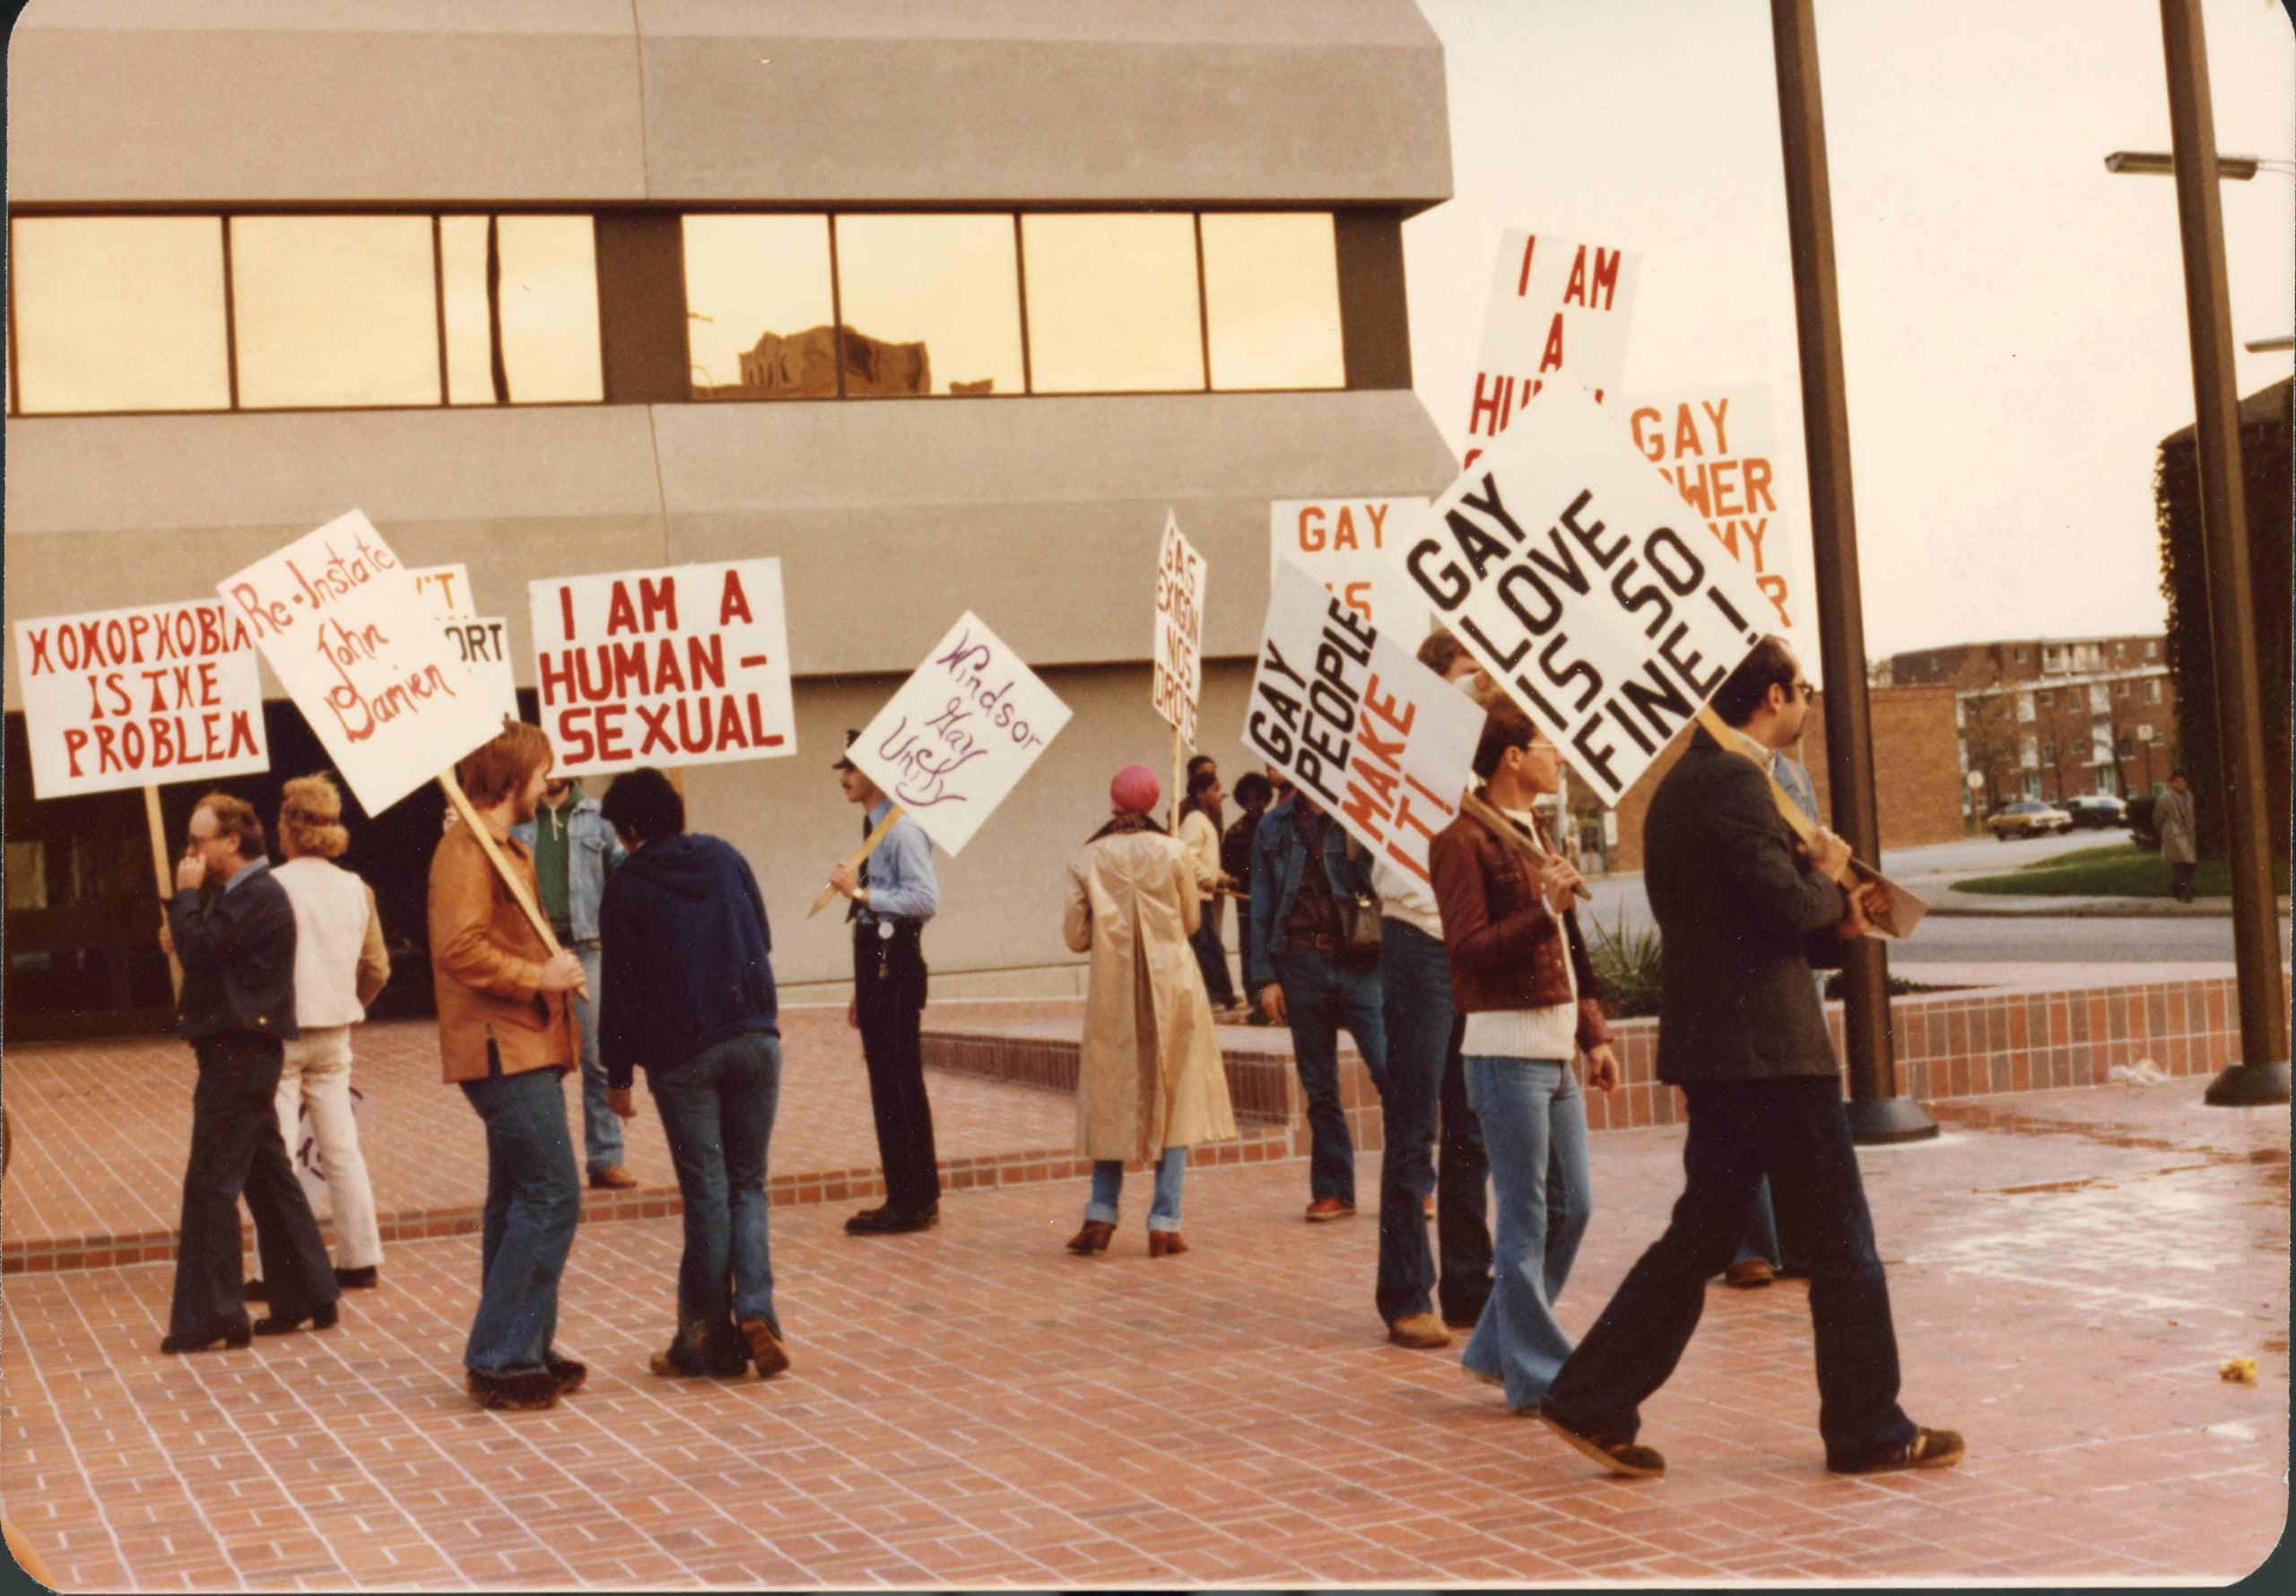 Photo of a group of protestors demonstrating outside the University of Windsor. They are standing in an open area paved with red bricks, and a concrete building with mirrored windows is visible in the background. Some are holding signs reading, “homophobia is the problem,” “reinstate John Damien,” “I am a human-sexual,” “Windsor Gay Unity,” “gay people make it!” and “gay love is so fine!” Others are holding signs that are illegible.